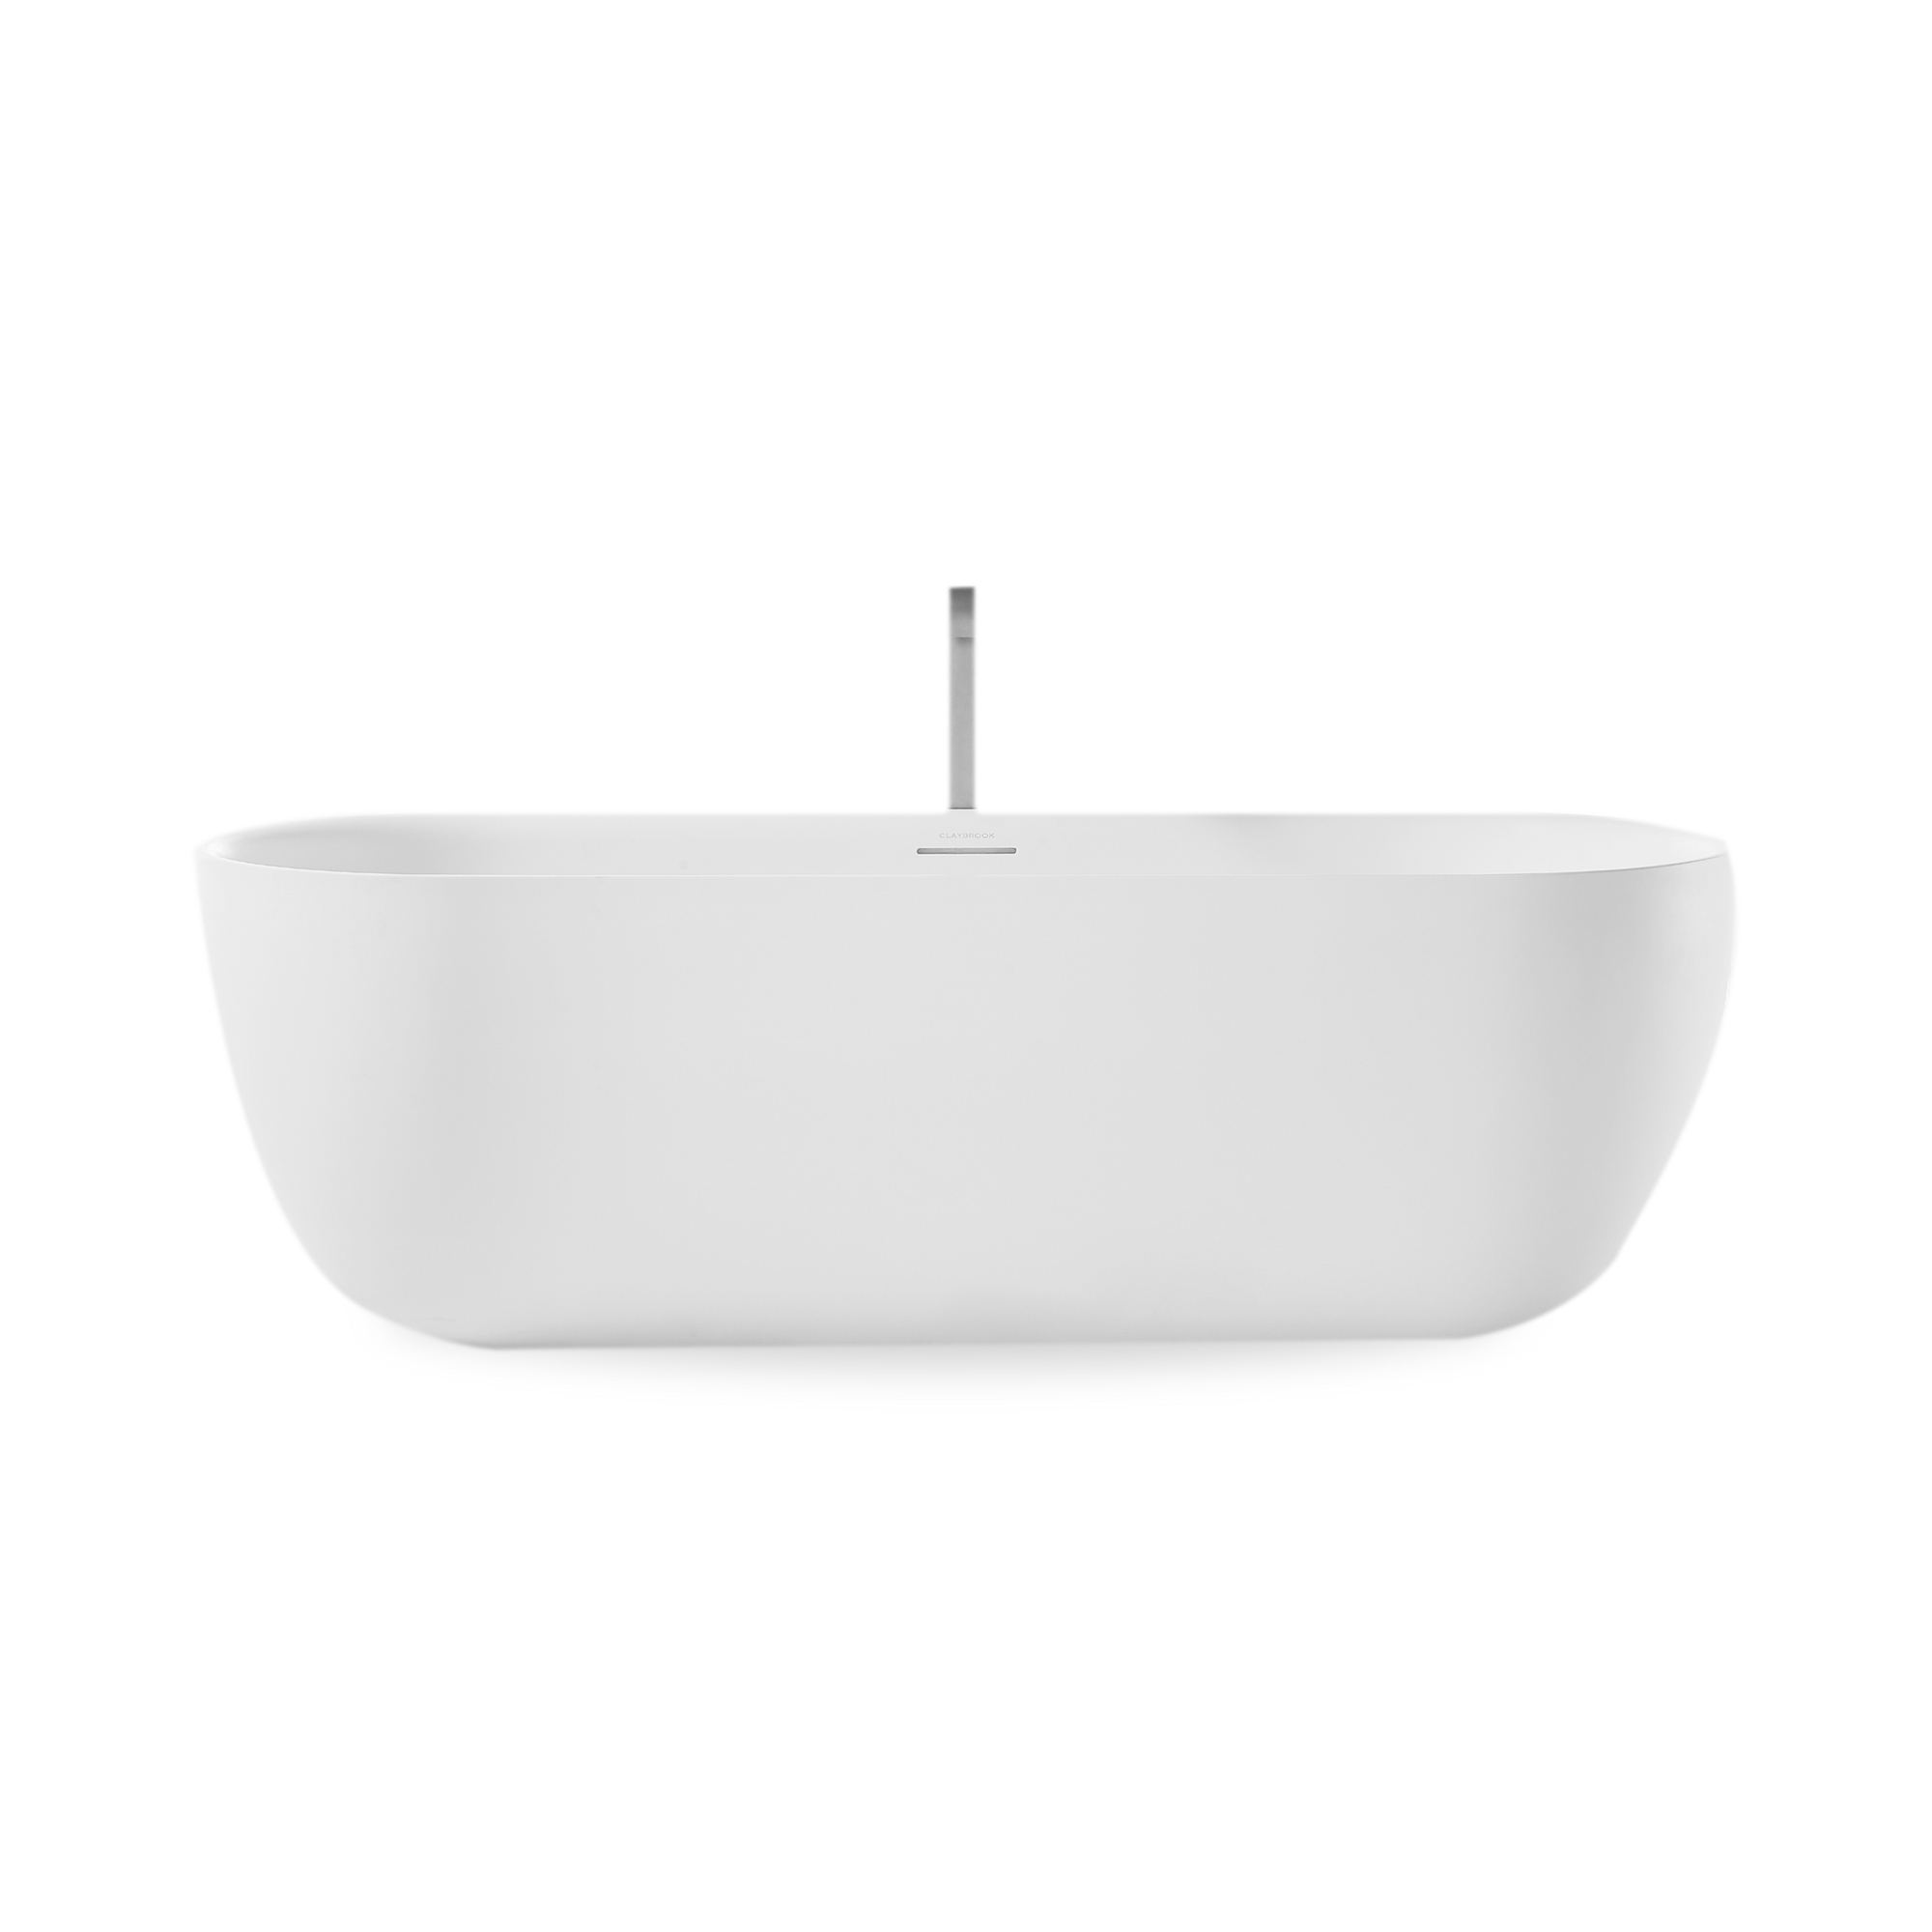 Freestanding soaker bath with tapered rim and integrated linear overflow.